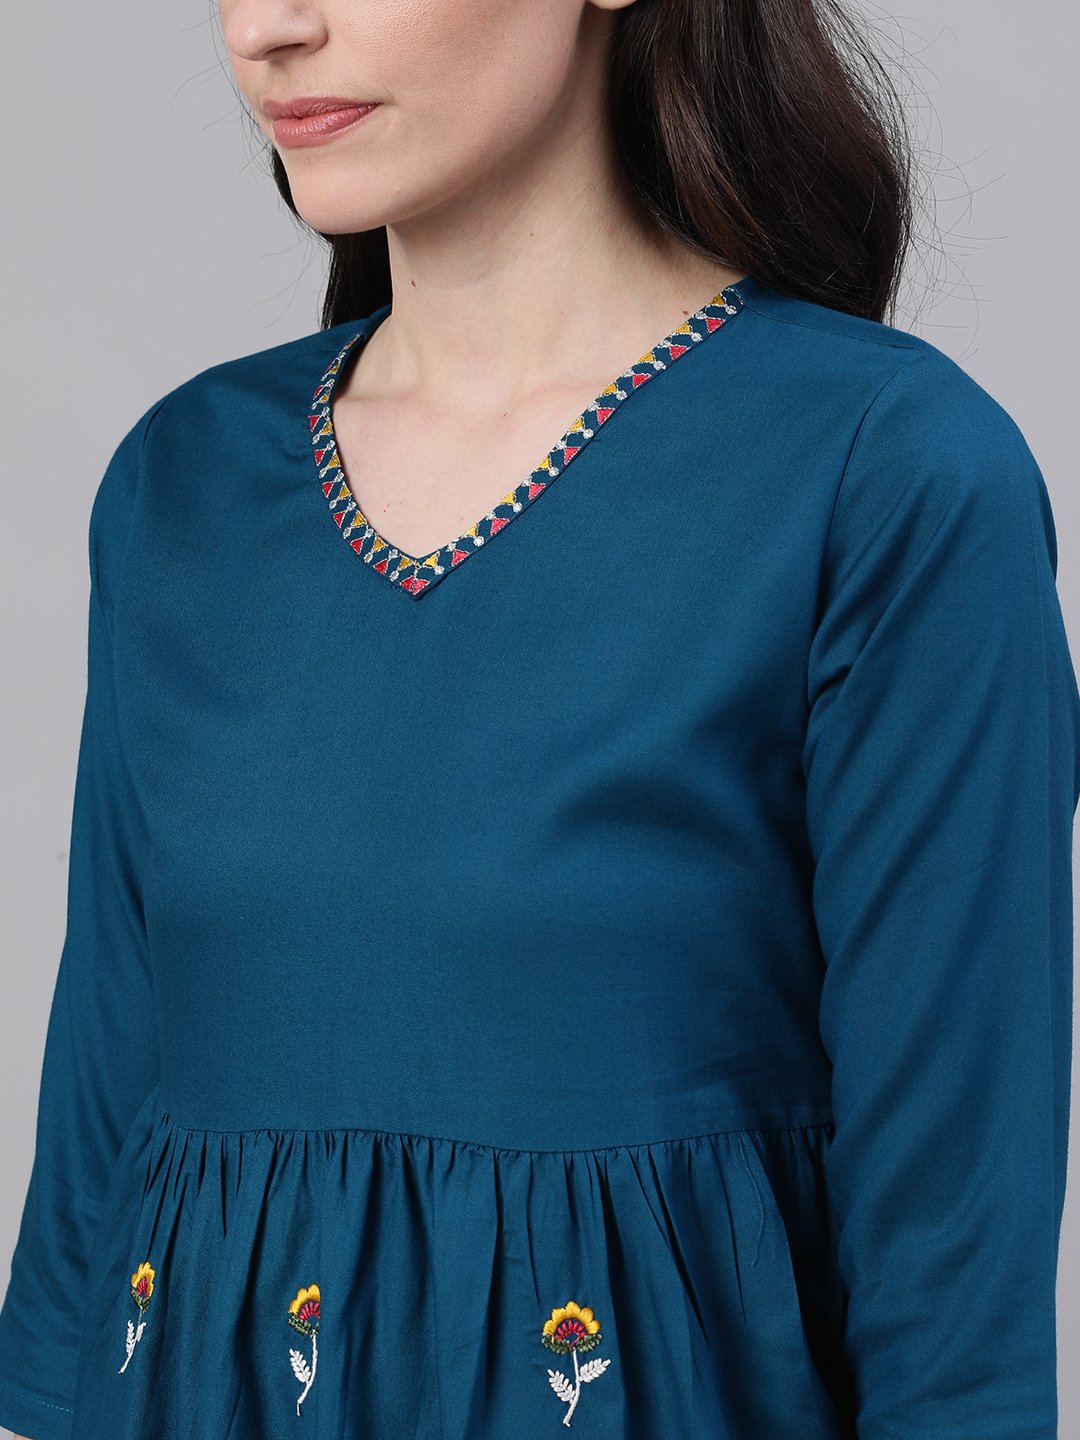 Women's Teal Blue Three-Quarter Sleeves Gathered Or Pleated Top - Nayo Clothing